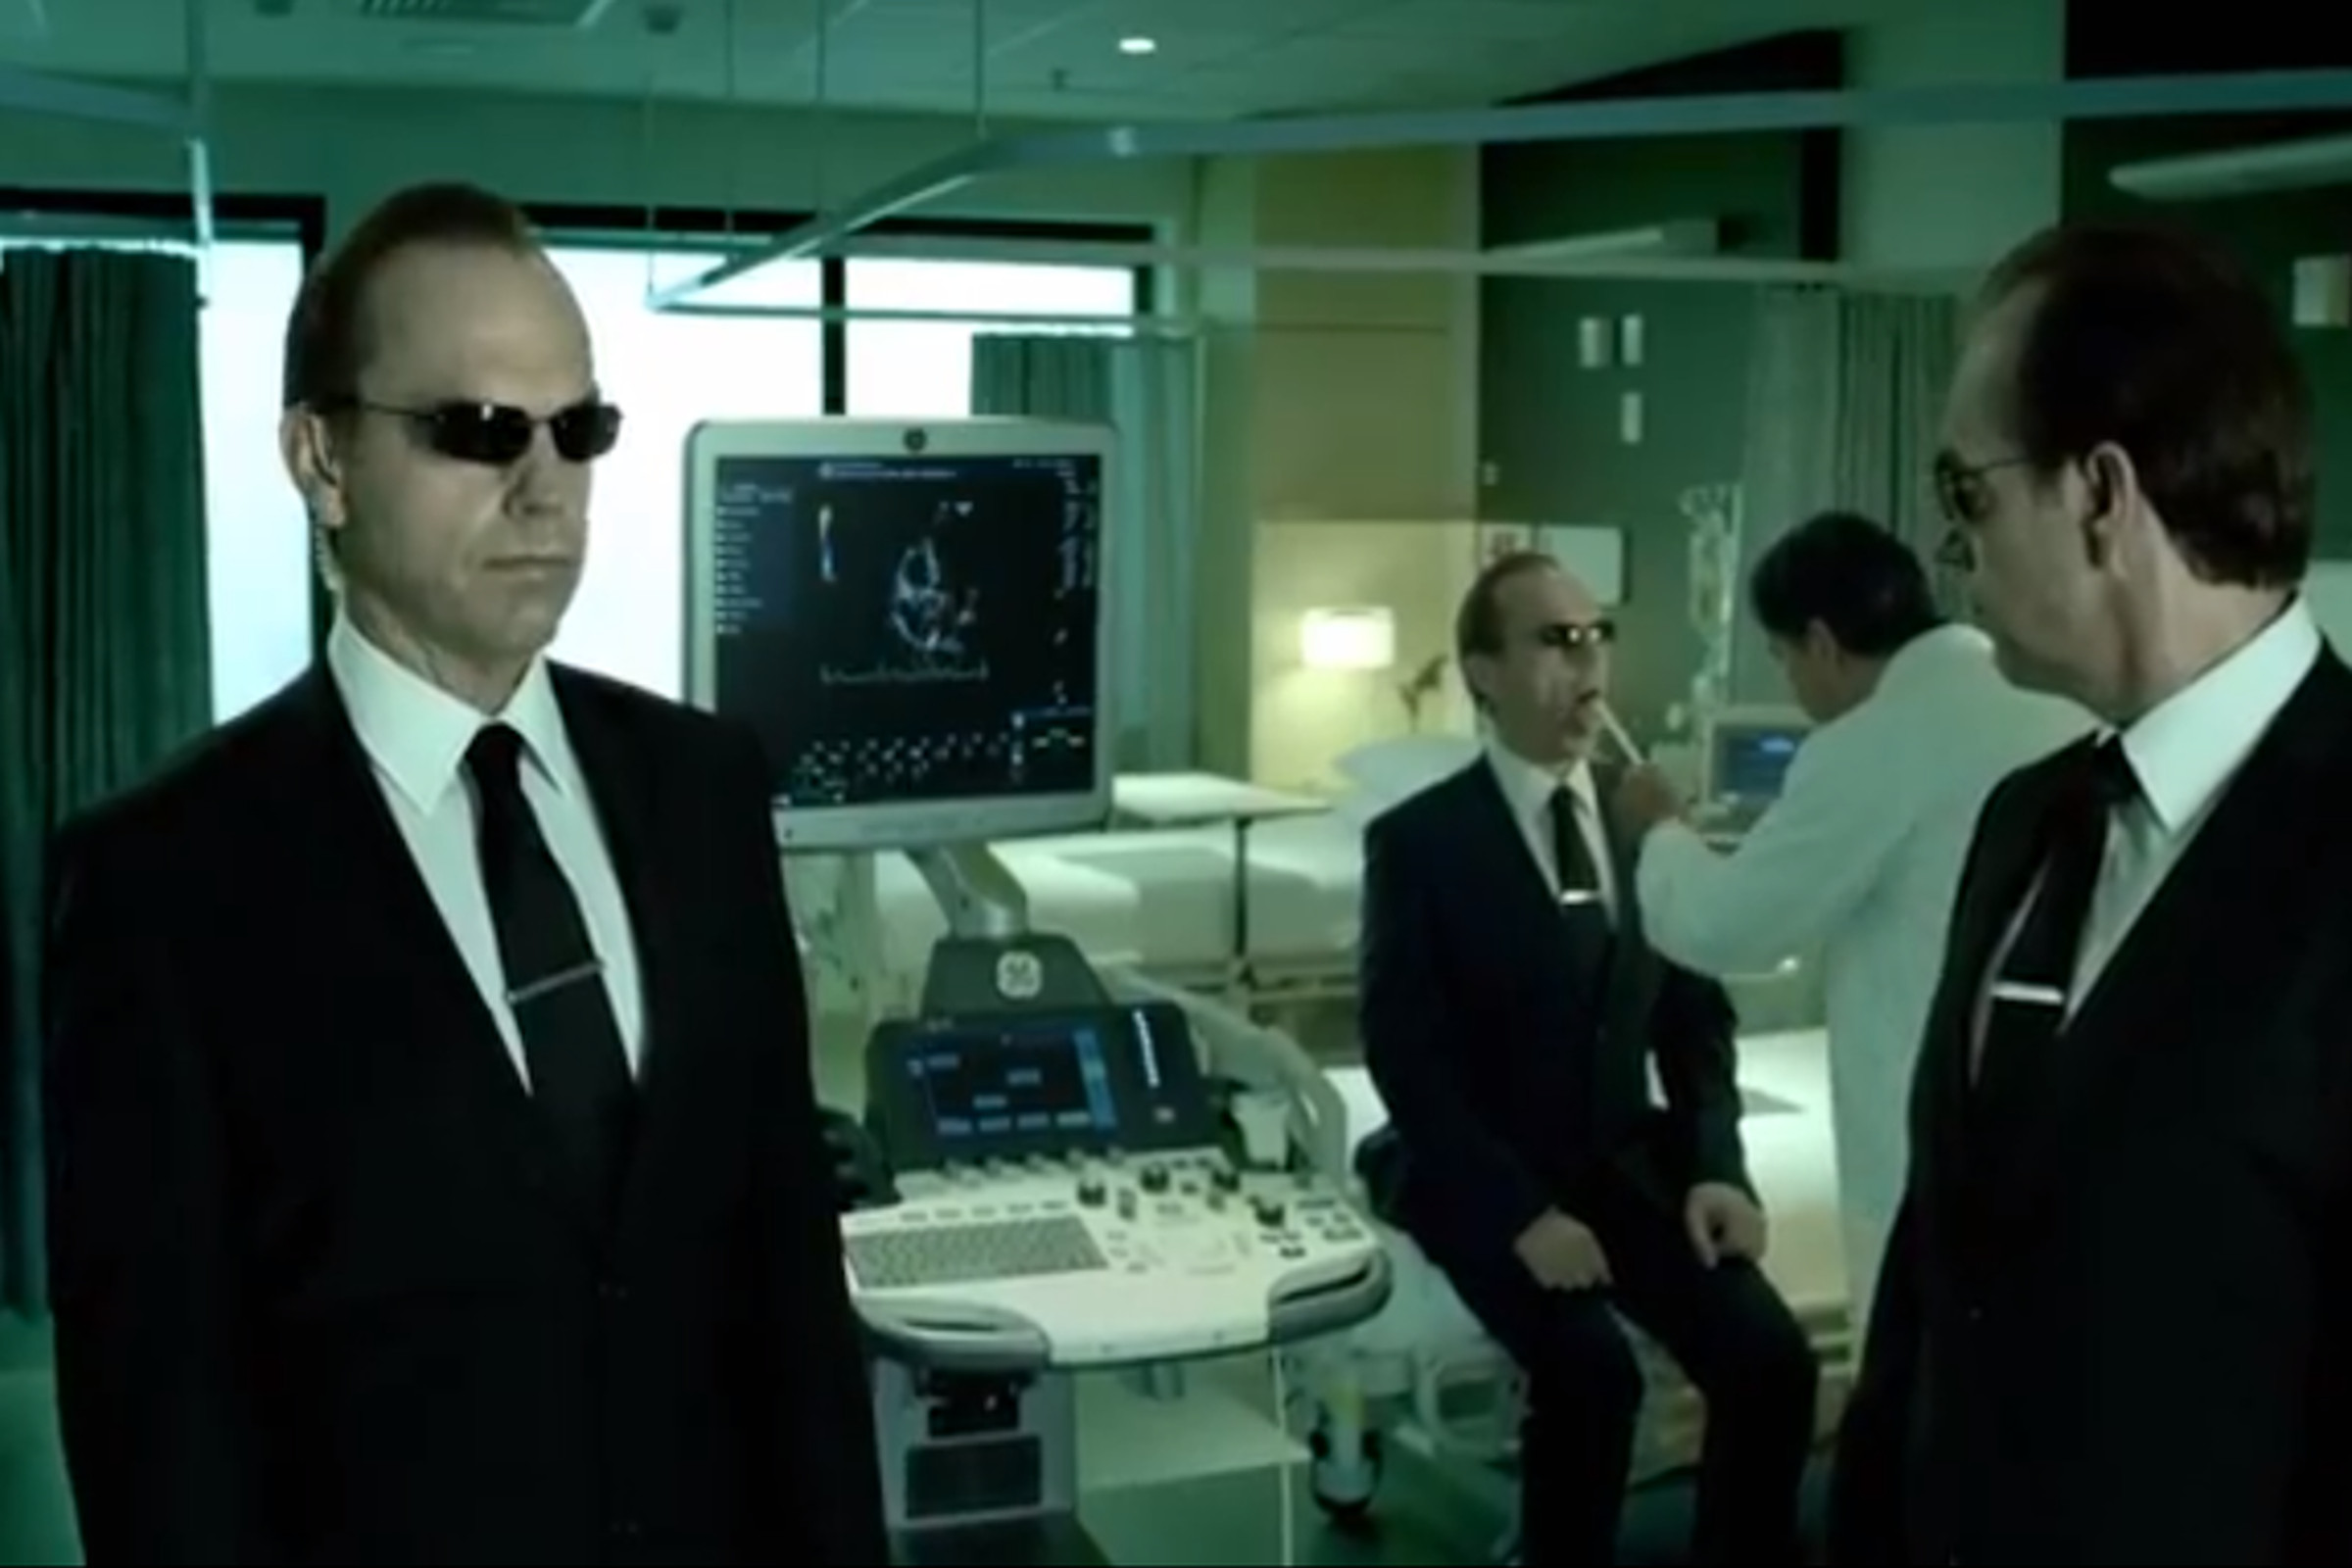 GE ad Agent Smith from The Matrix